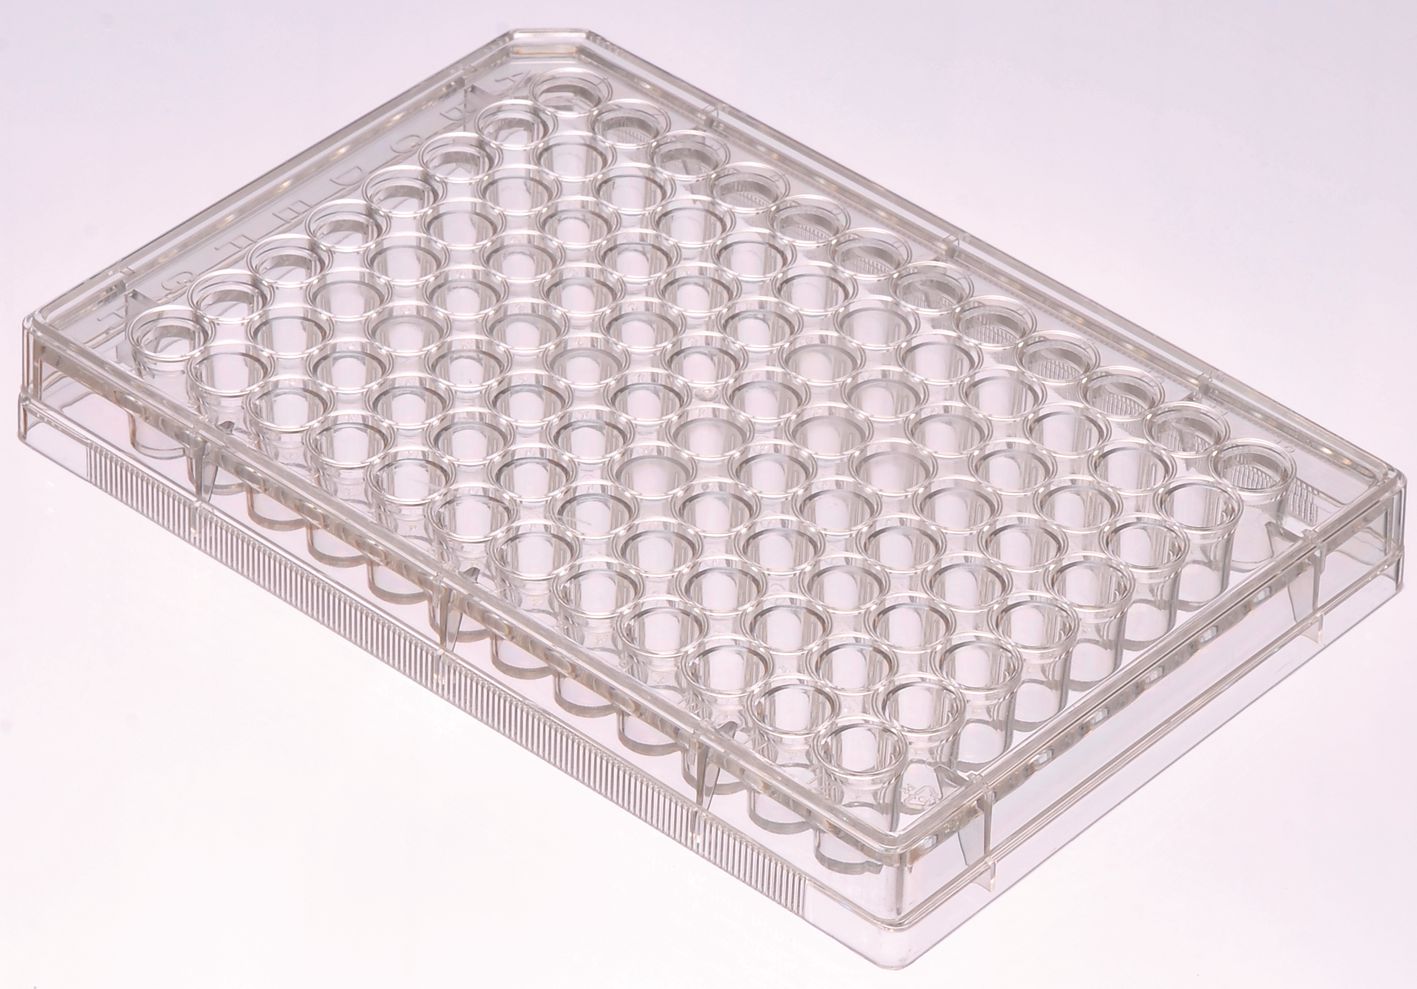 Multiwell cell culture plate (96 well), Treated for Increased Cell Attachment